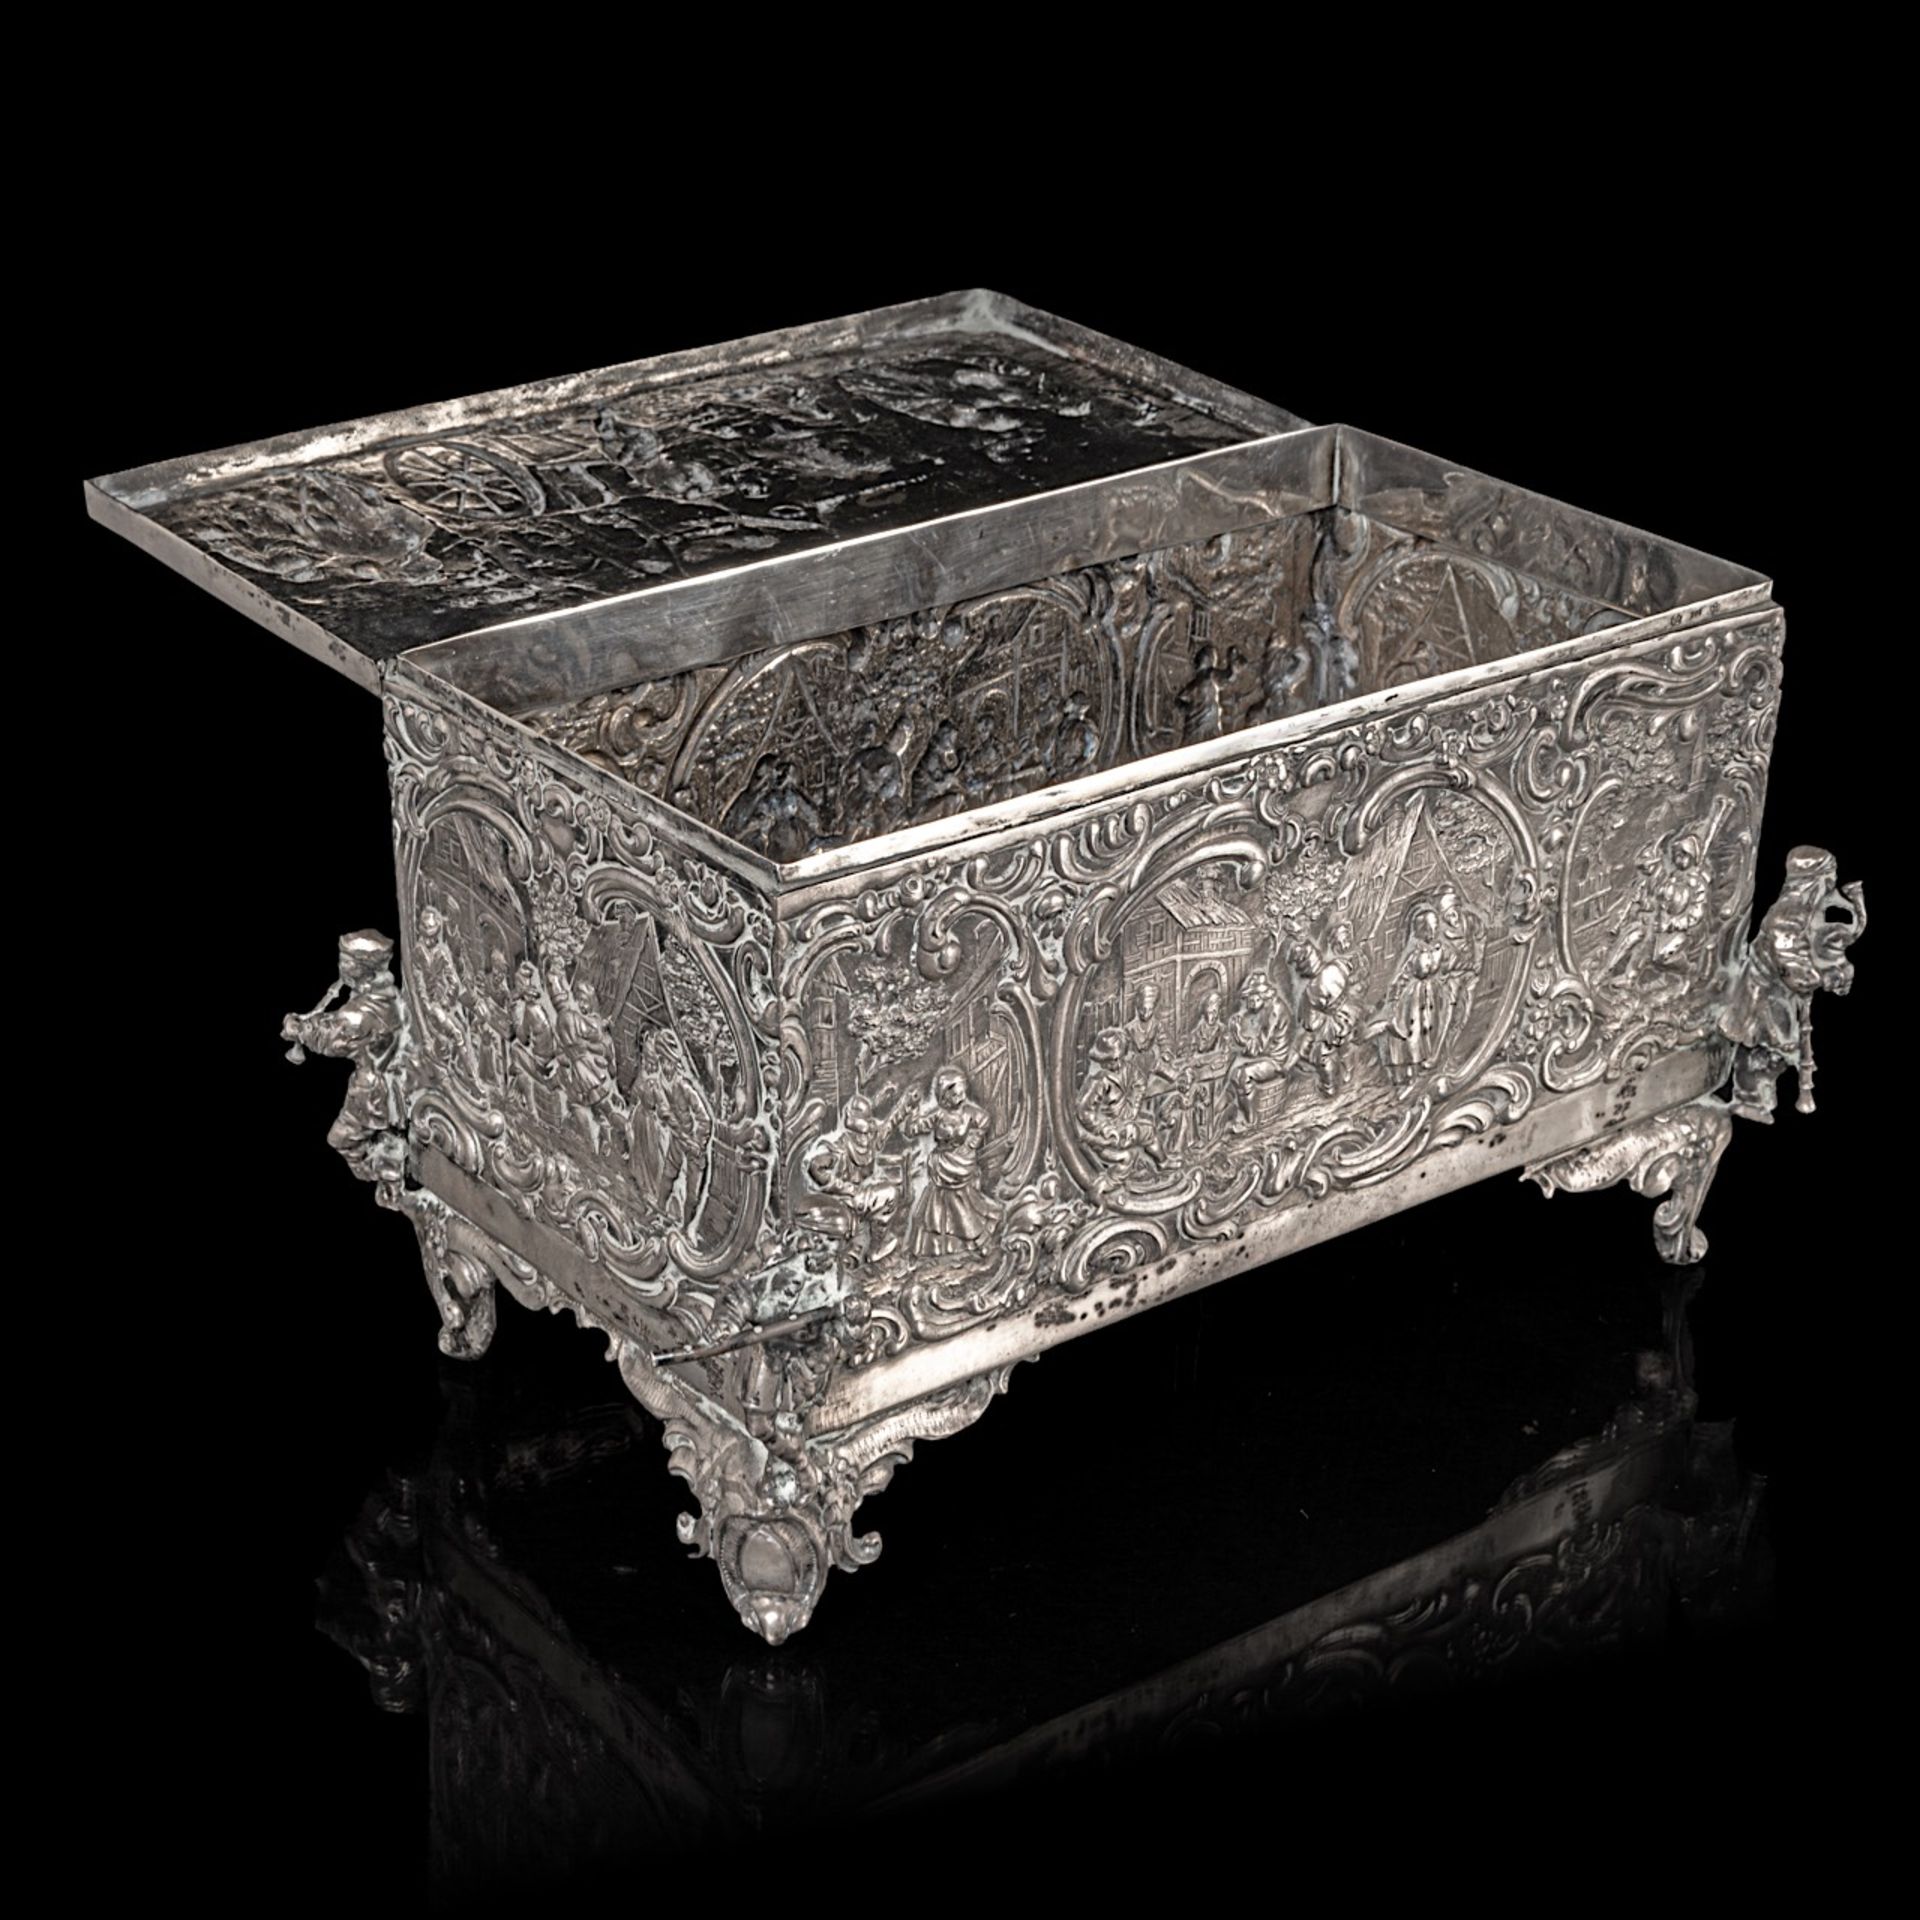 A Baroque Revival German silver jewellery casket, (1888-present), 800/000, weight ca: 1312 g 14.5 x - Image 8 of 9